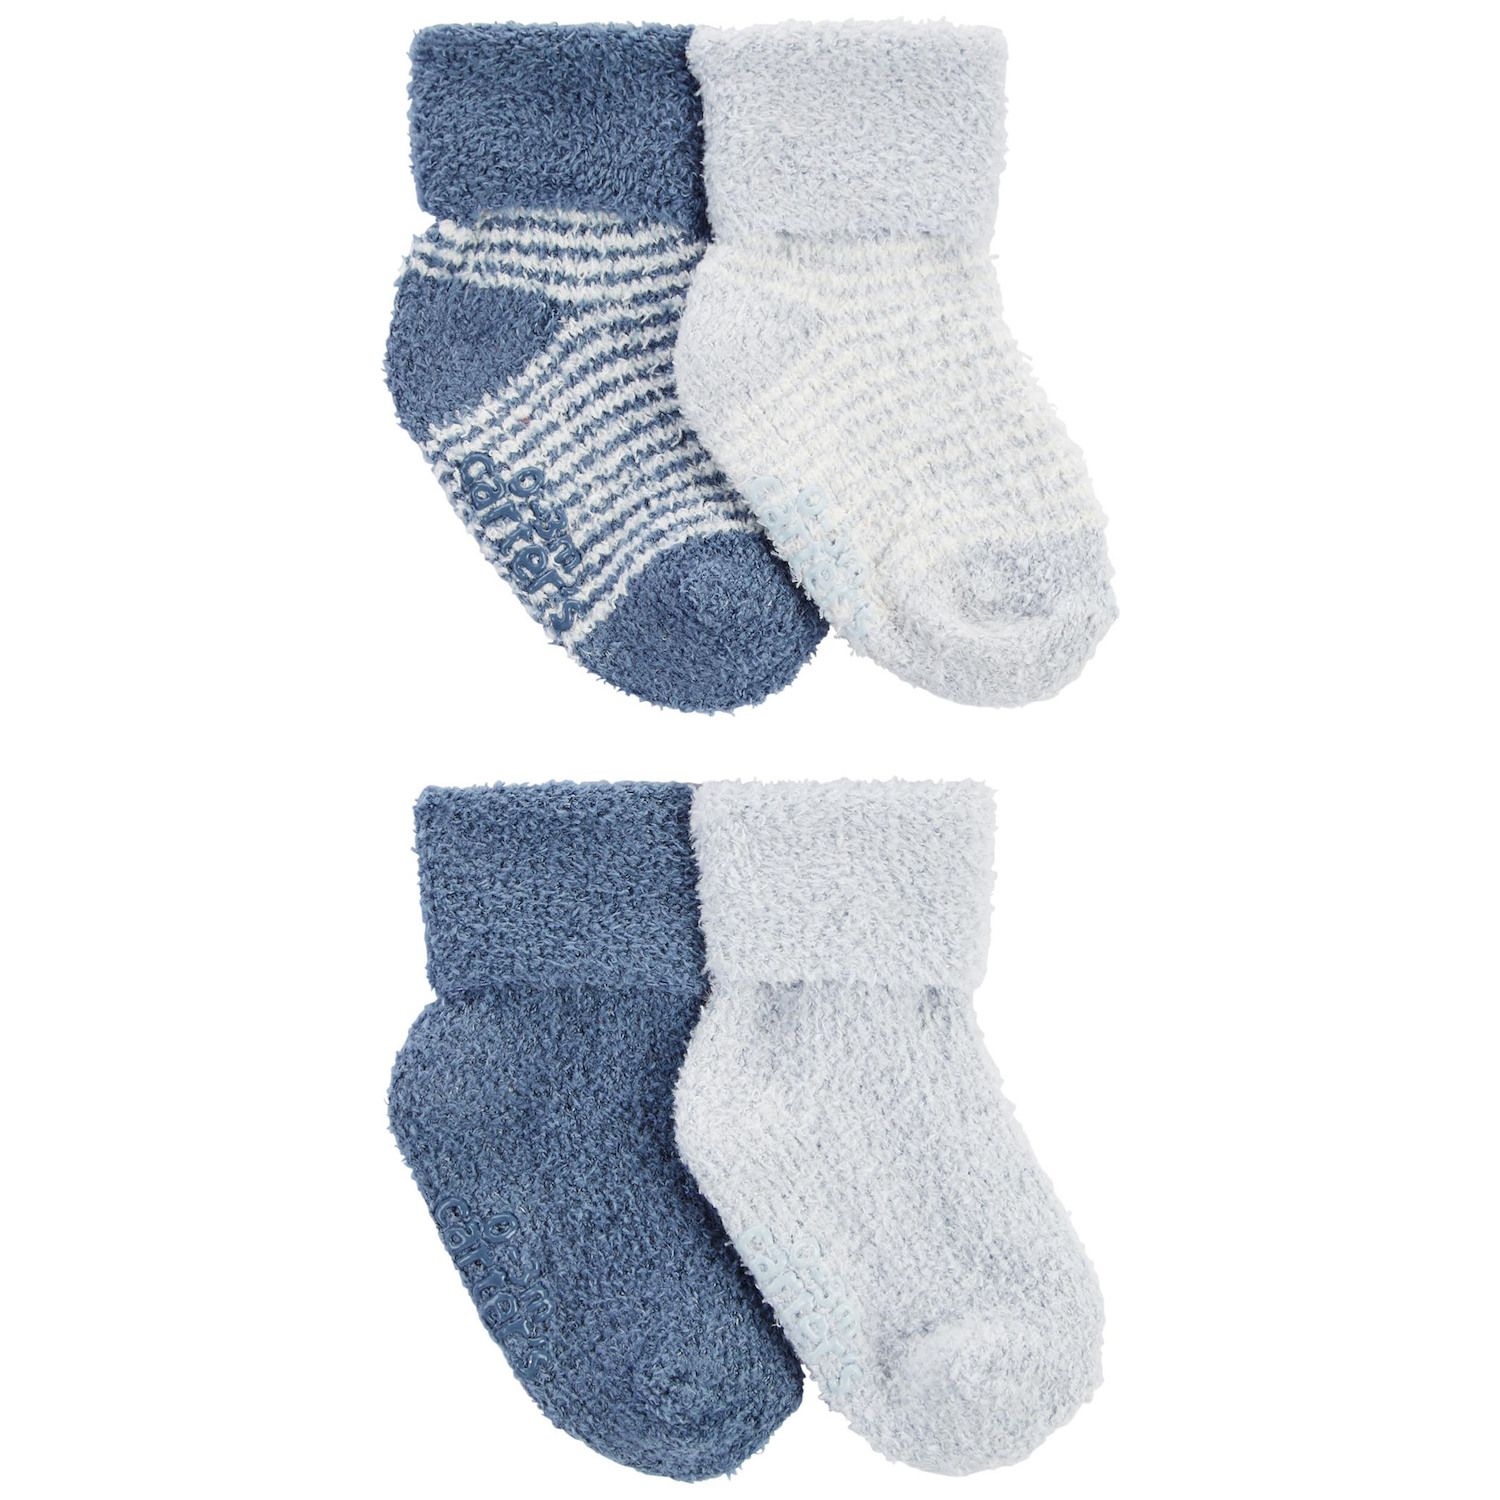 Luvable Friends Baby Boy Newborn and Baby Socks Set, Space, 0-3 Months